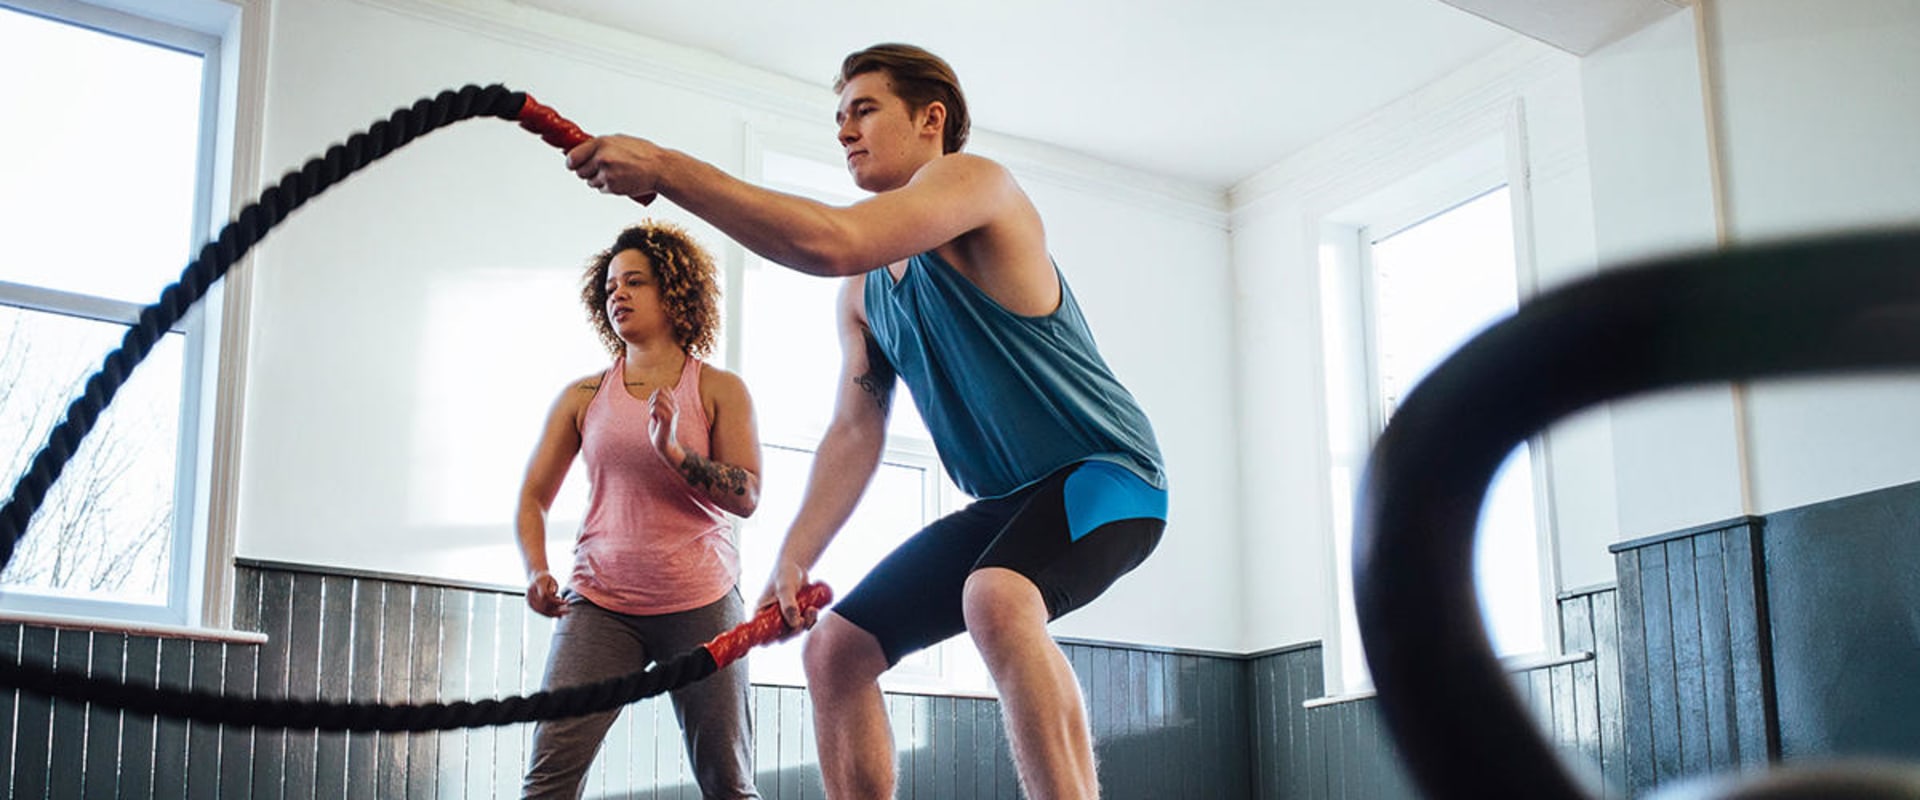 What are the roles and responsibilities of a personal trainer?